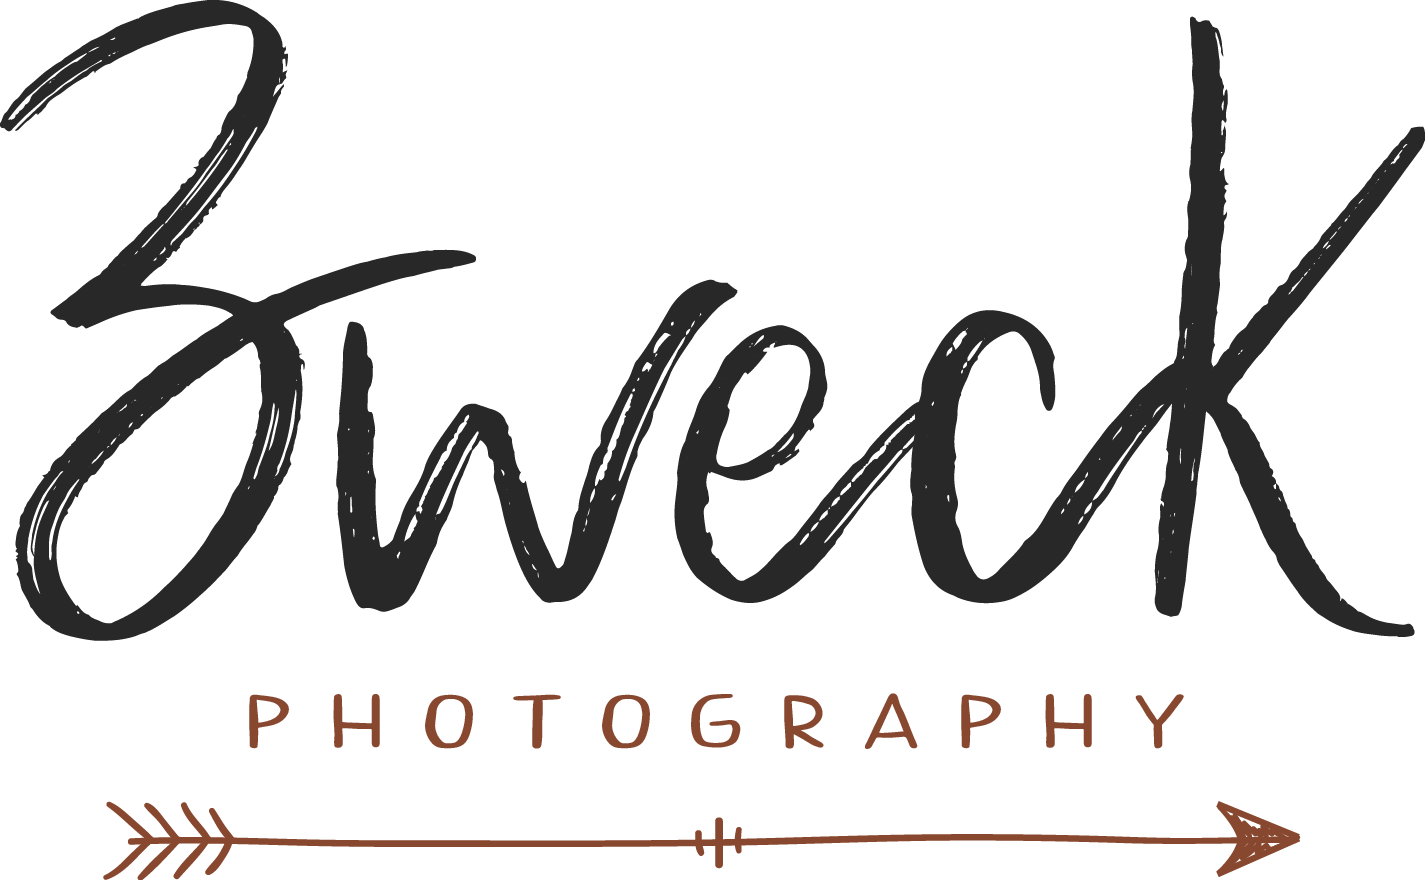 Zweck Photography